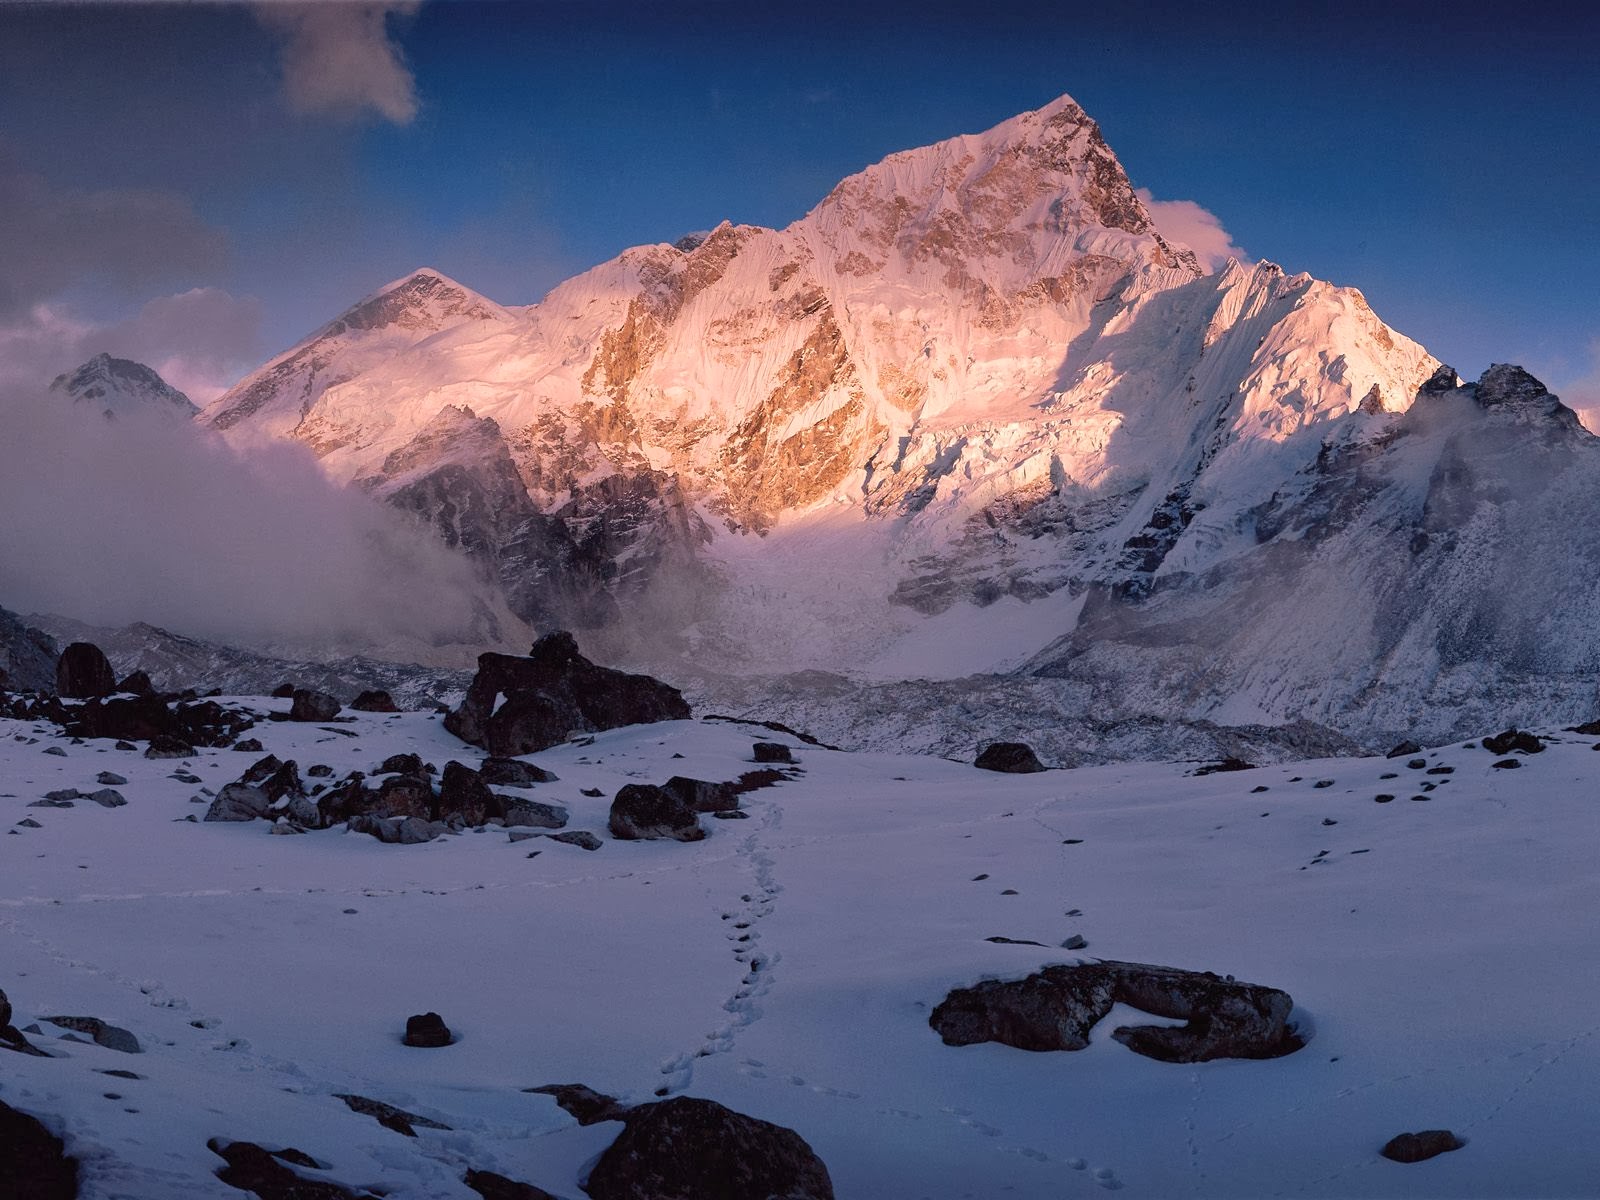 Here are some lesser known interesting facts about Himalayas: